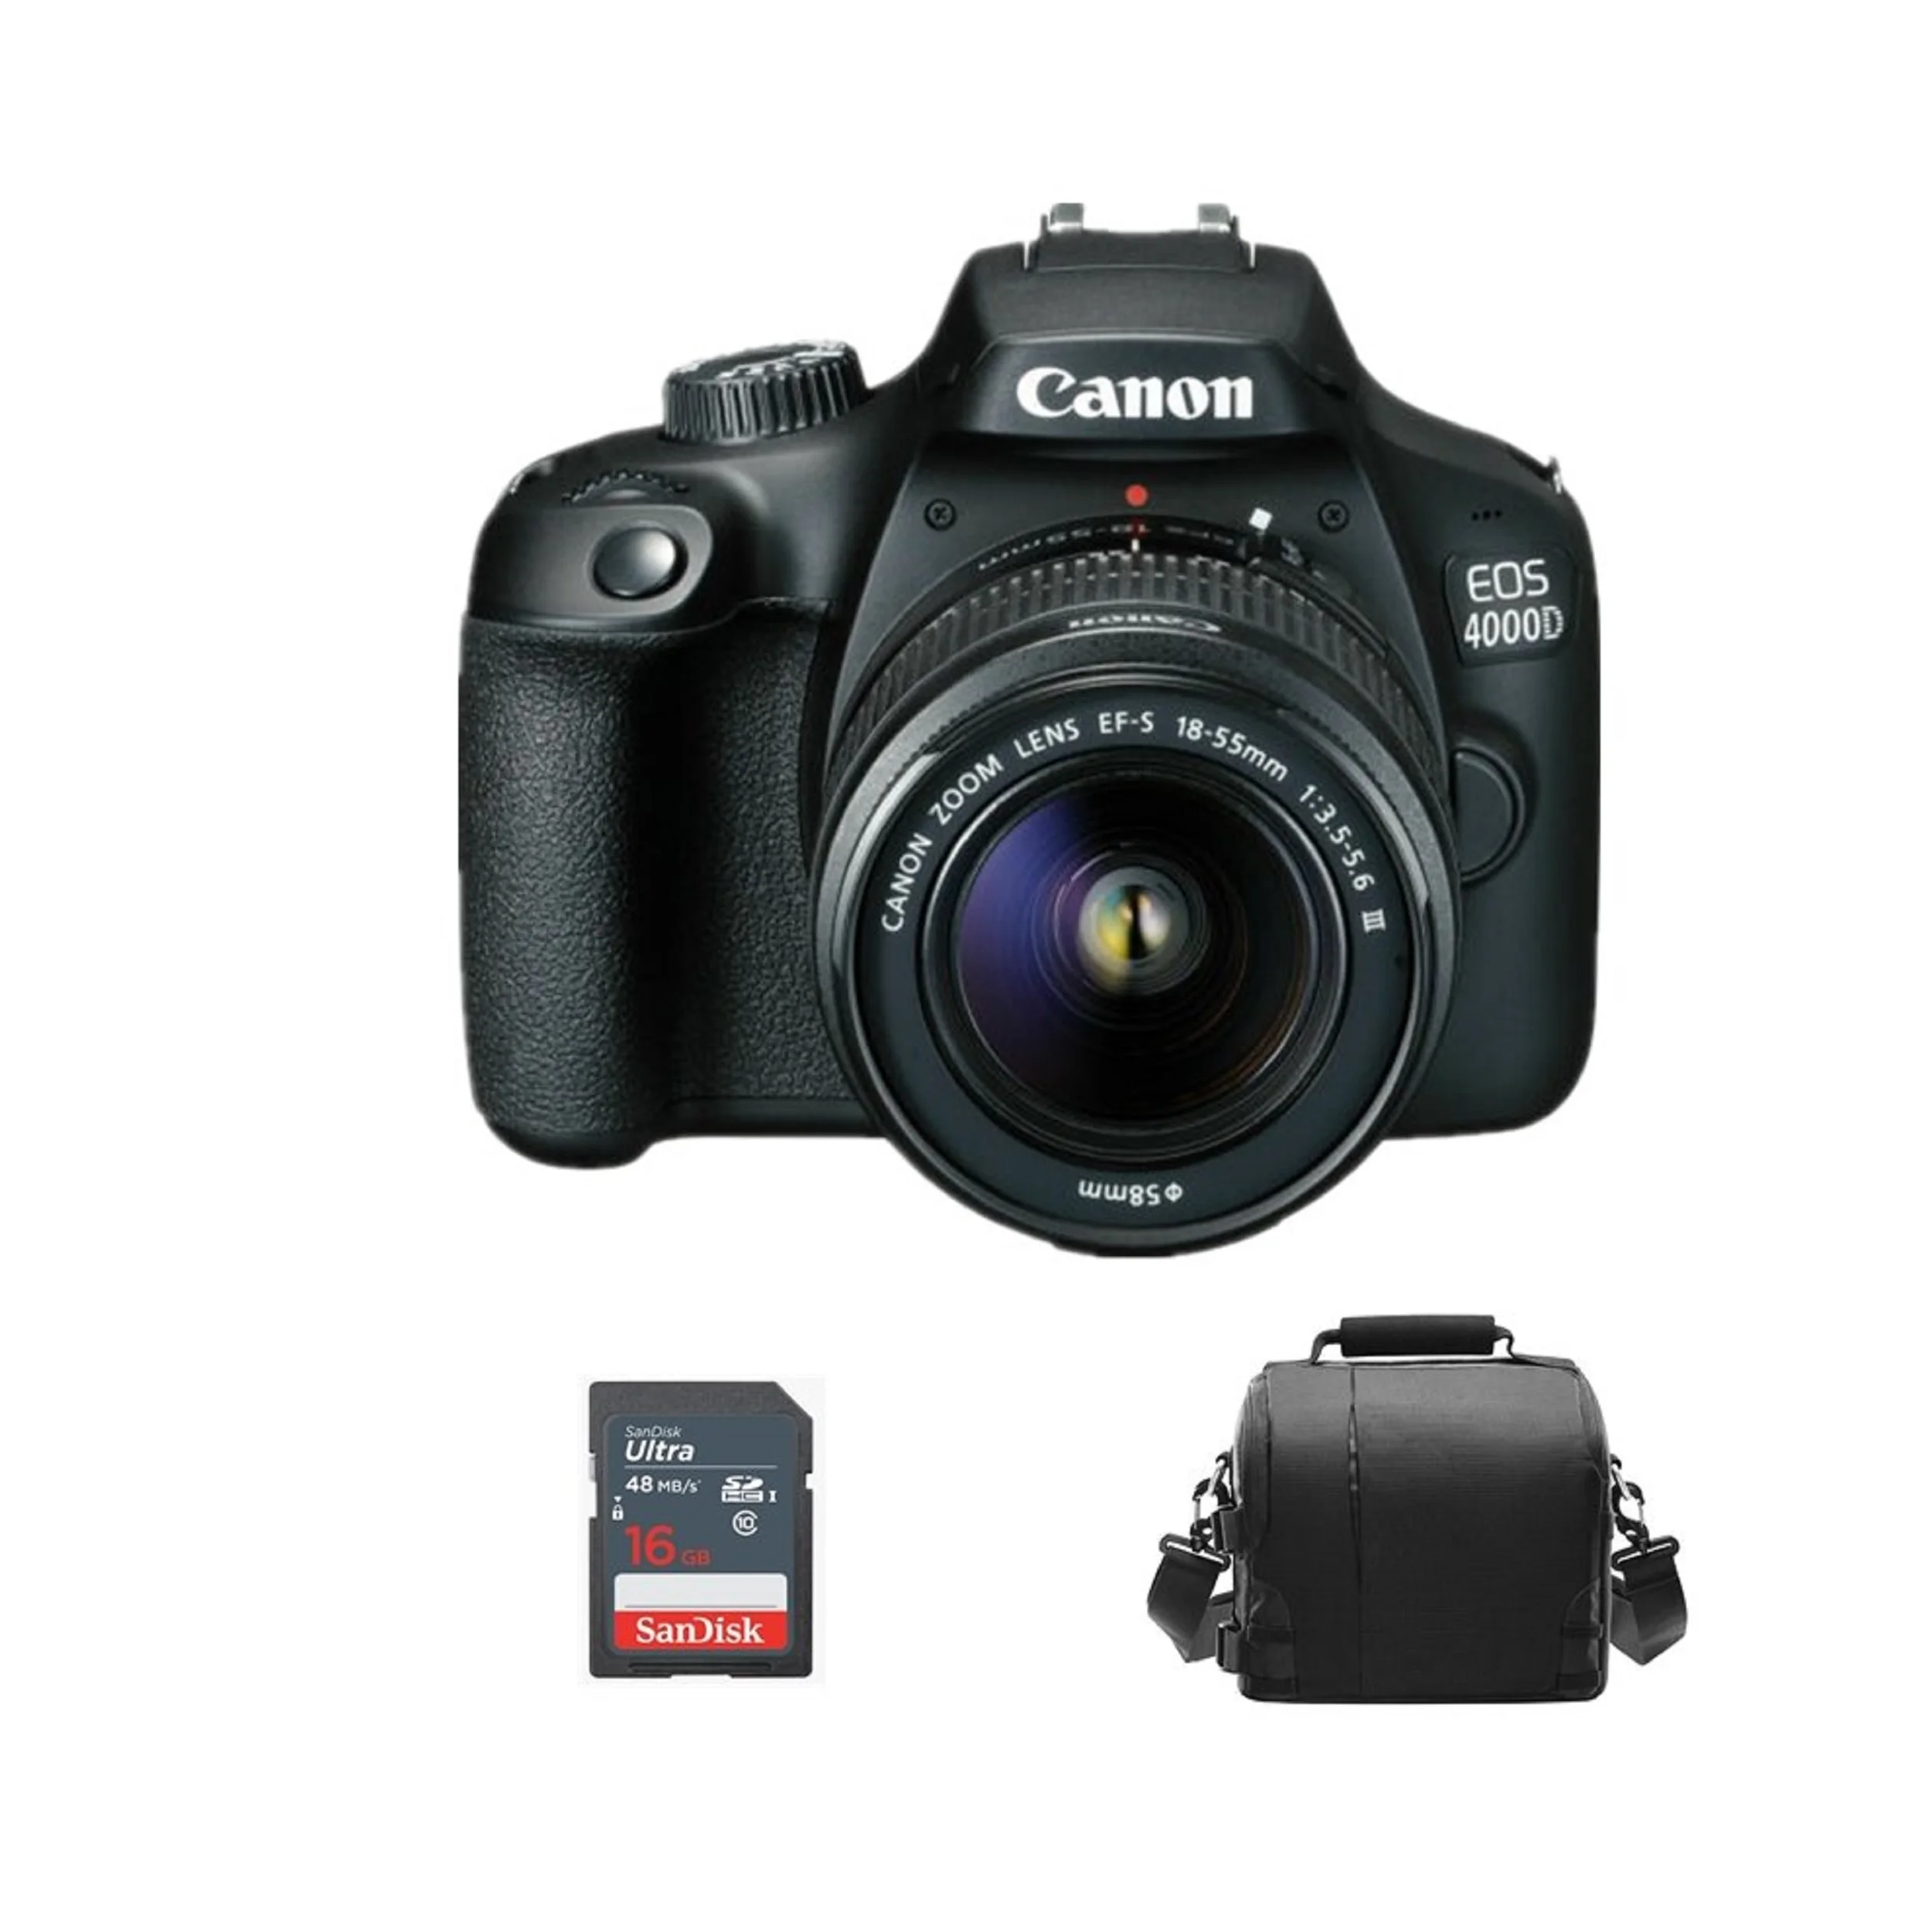 

CANON EOS 4000D DSLR Camera with EF-S 18-55MM F3.5-5.6 III Lens (Canon EOS Rebel T100) + Bag +16gb SD card